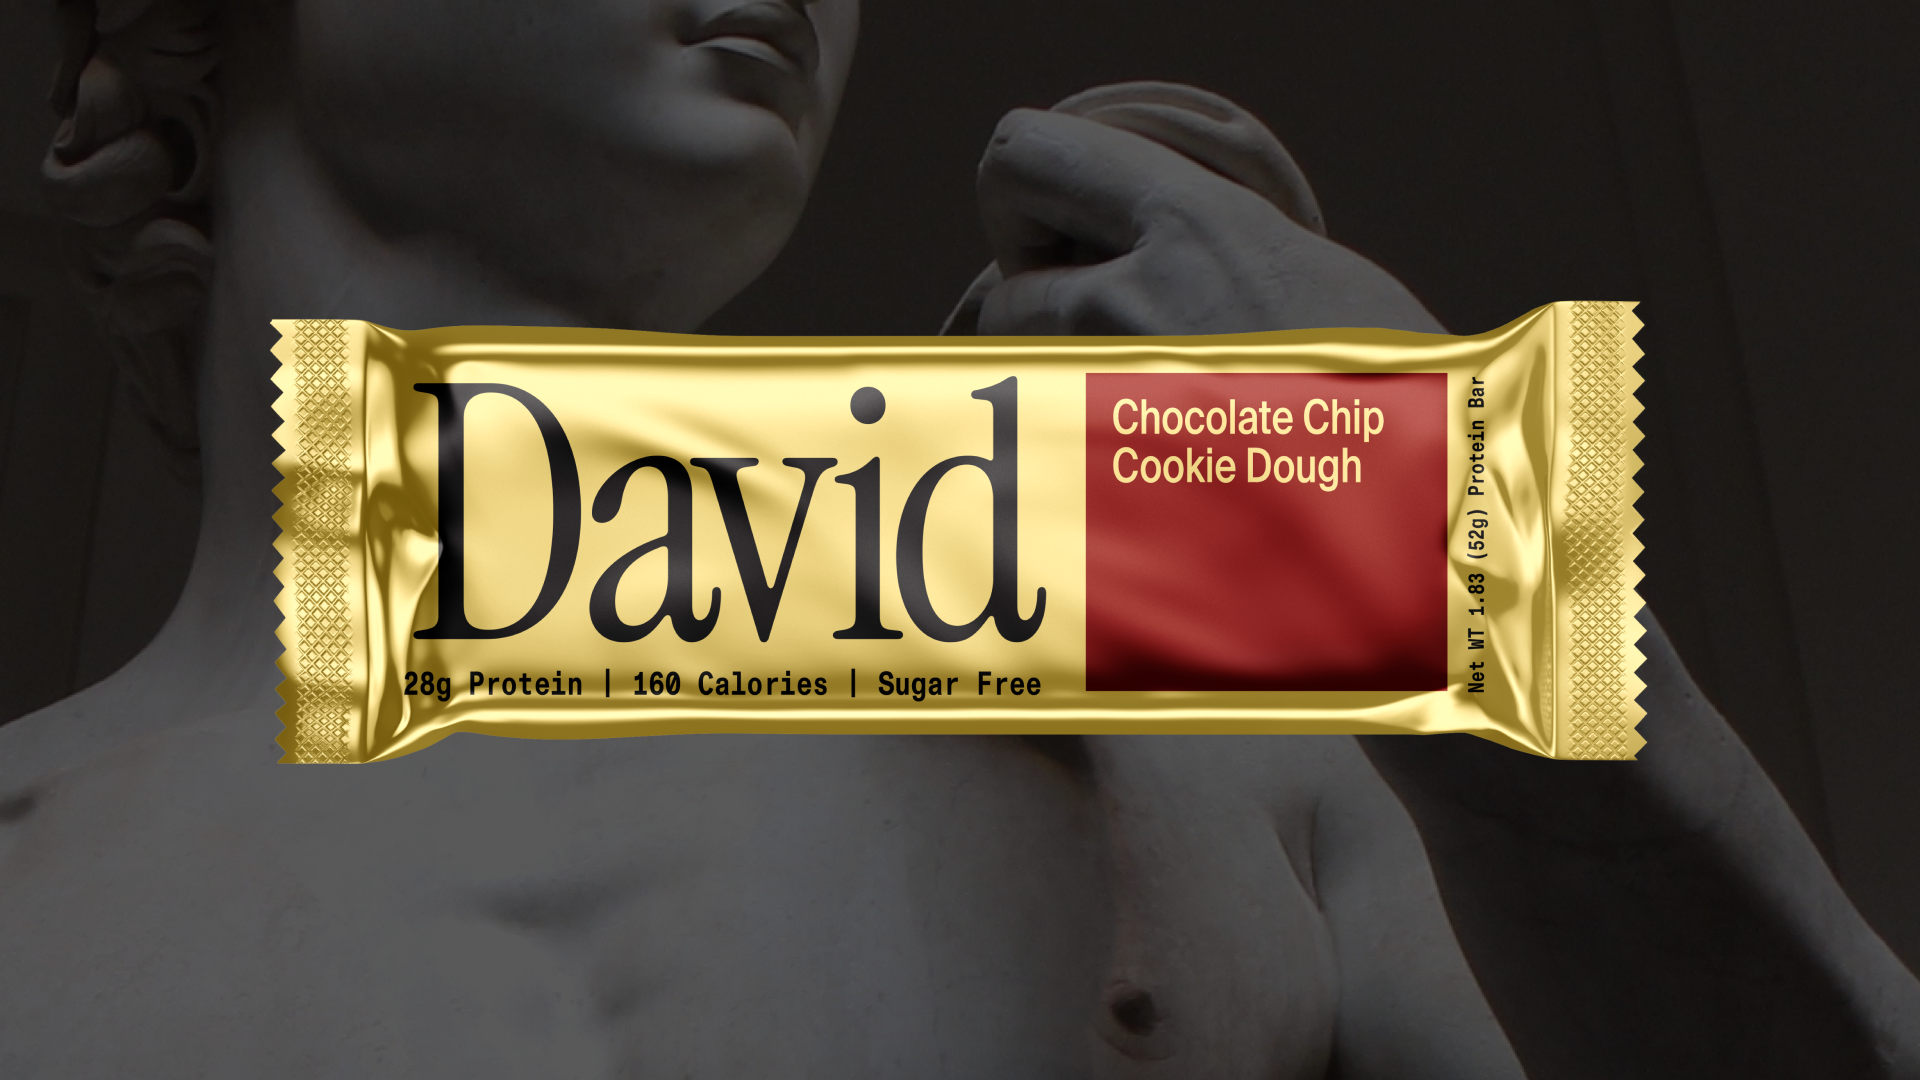 Day Job Expertly Sculpts Branding and Packaging for Latest Protein Bar ‘David’